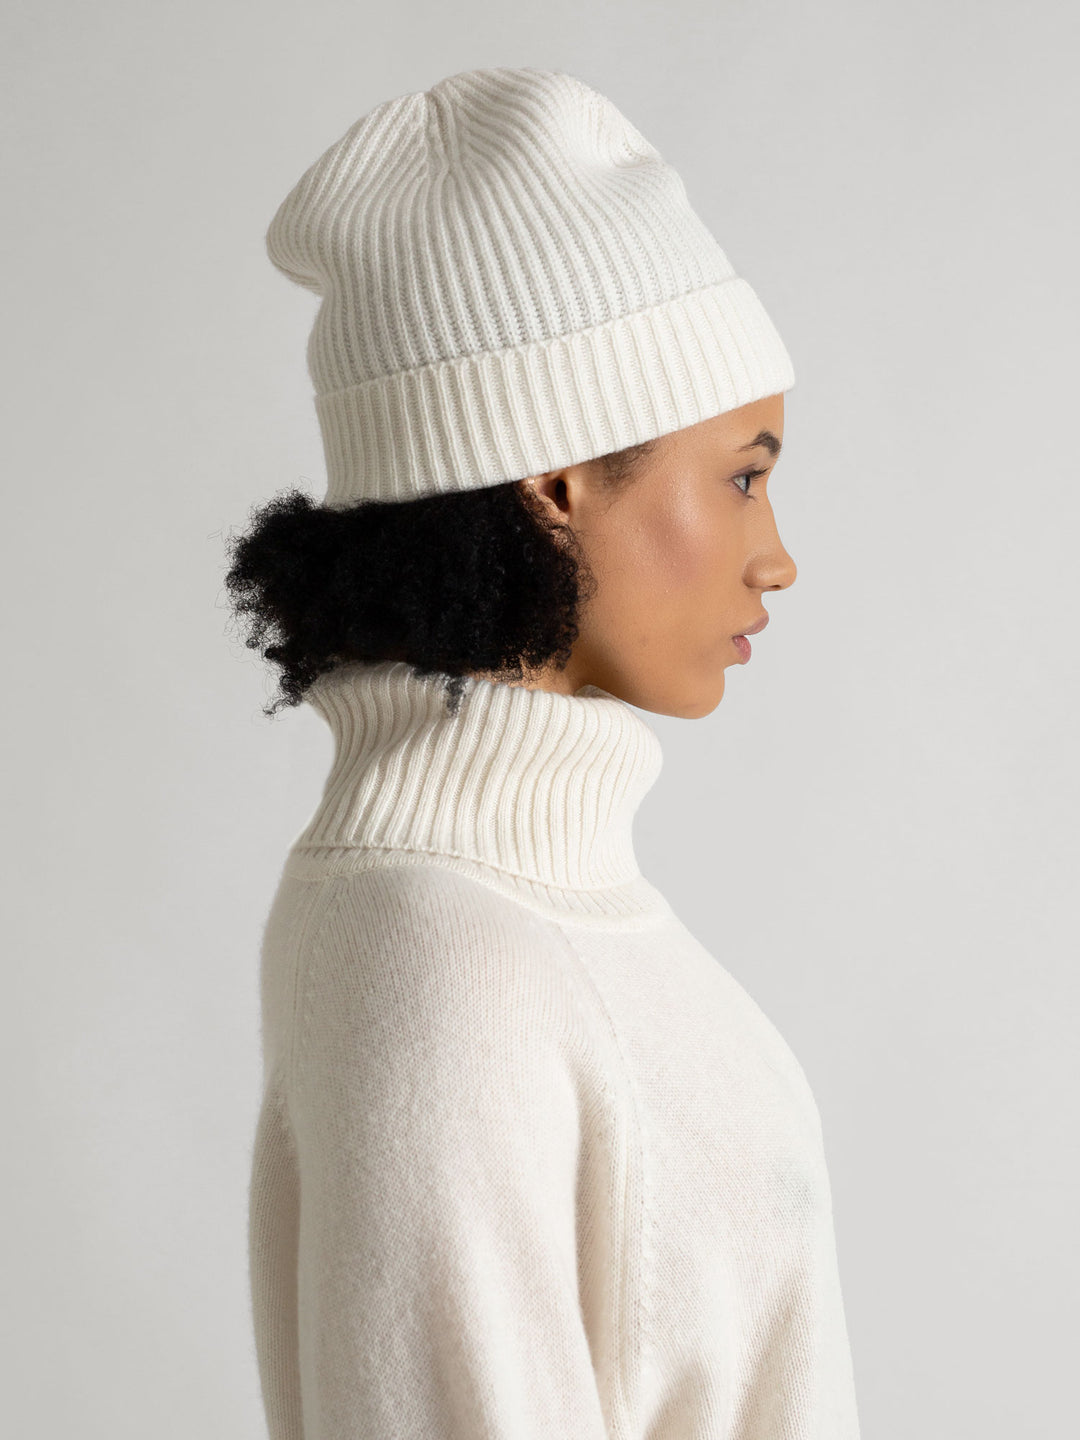 Cashmere cap "Elli", 100% pure cashmere, color: White, knitted, non itching, soft, beanie, cap, Scandinavian design by Kashmina